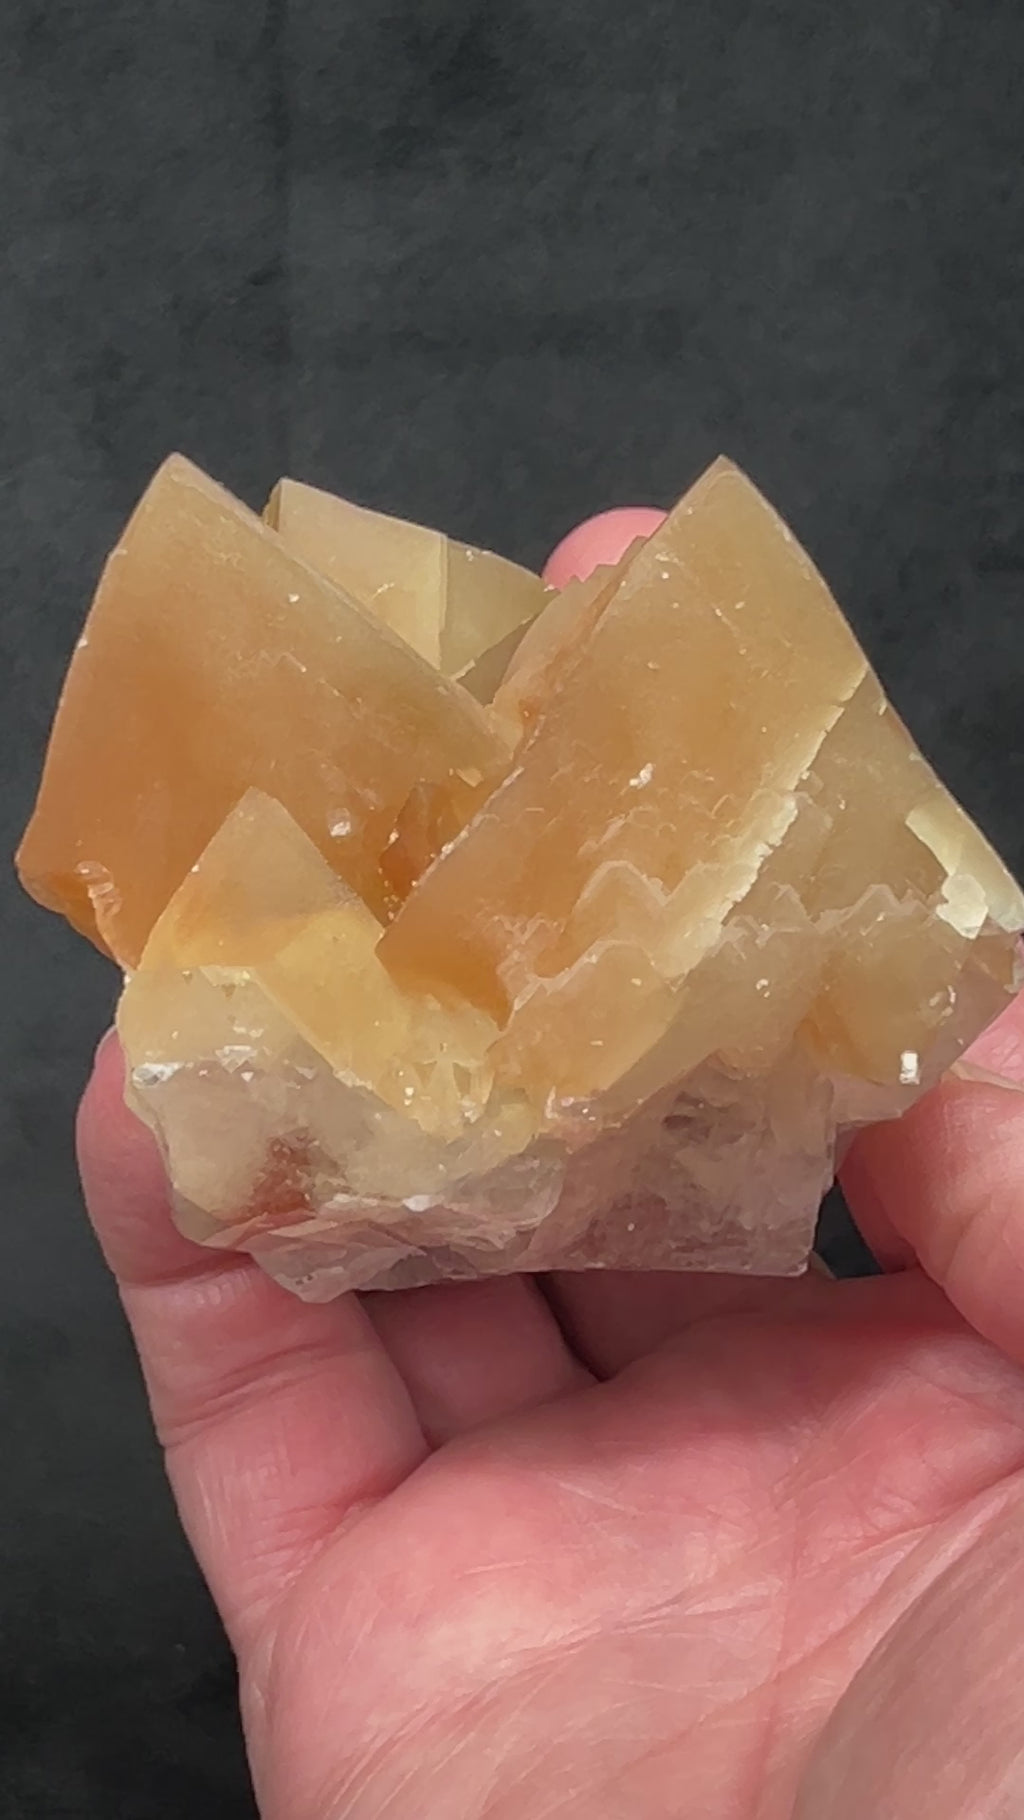 The orangish-brown to honey-caramel color and the terrific luster of these scalenohedral Calcite crystals from the Santa Eulalia District in Mexico are beautiful.